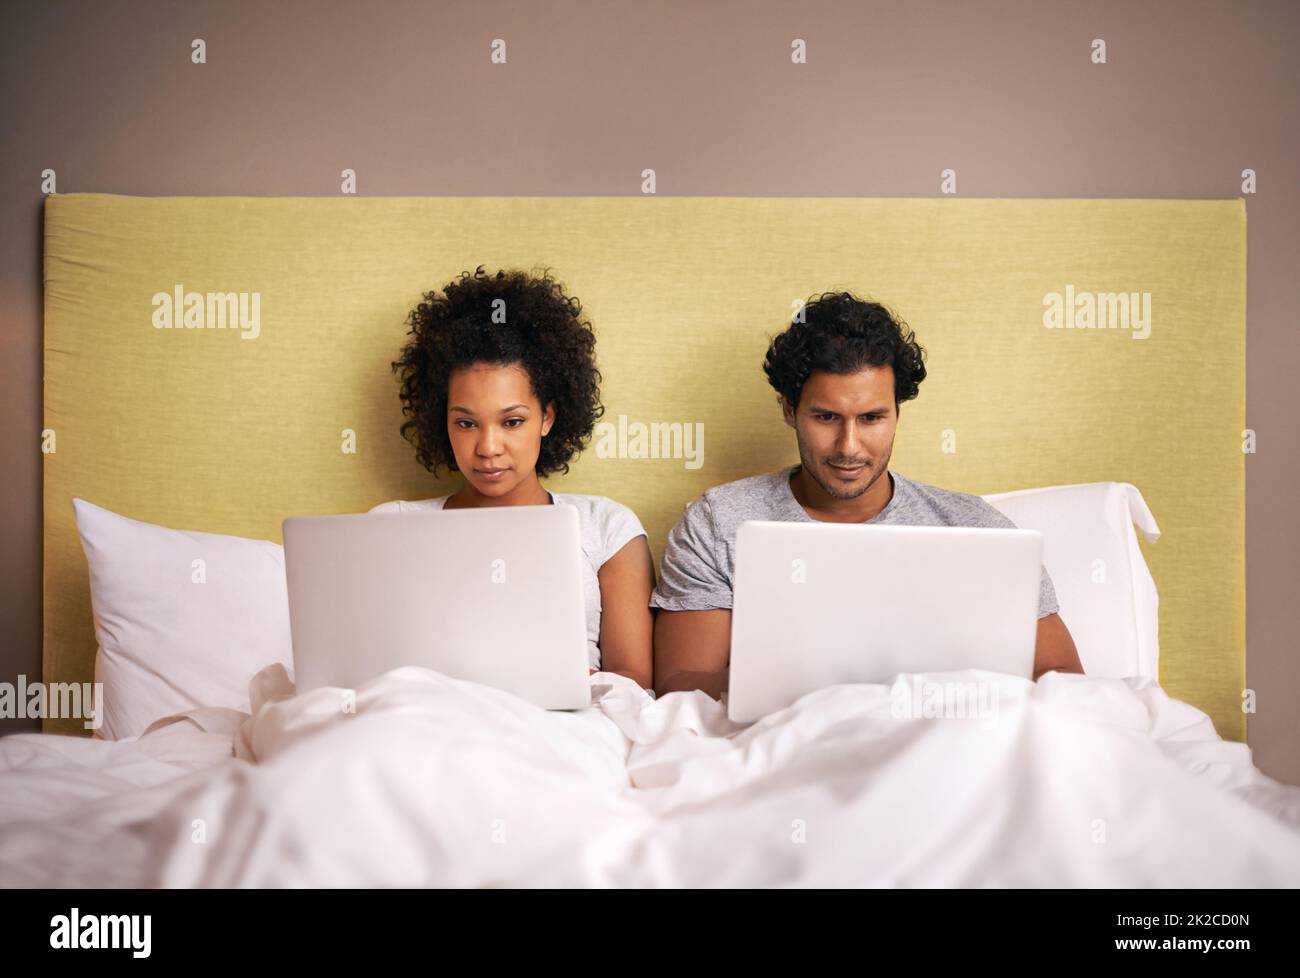 Bedroom boardroom. A young couple in bed with their laptops. Stock Photo